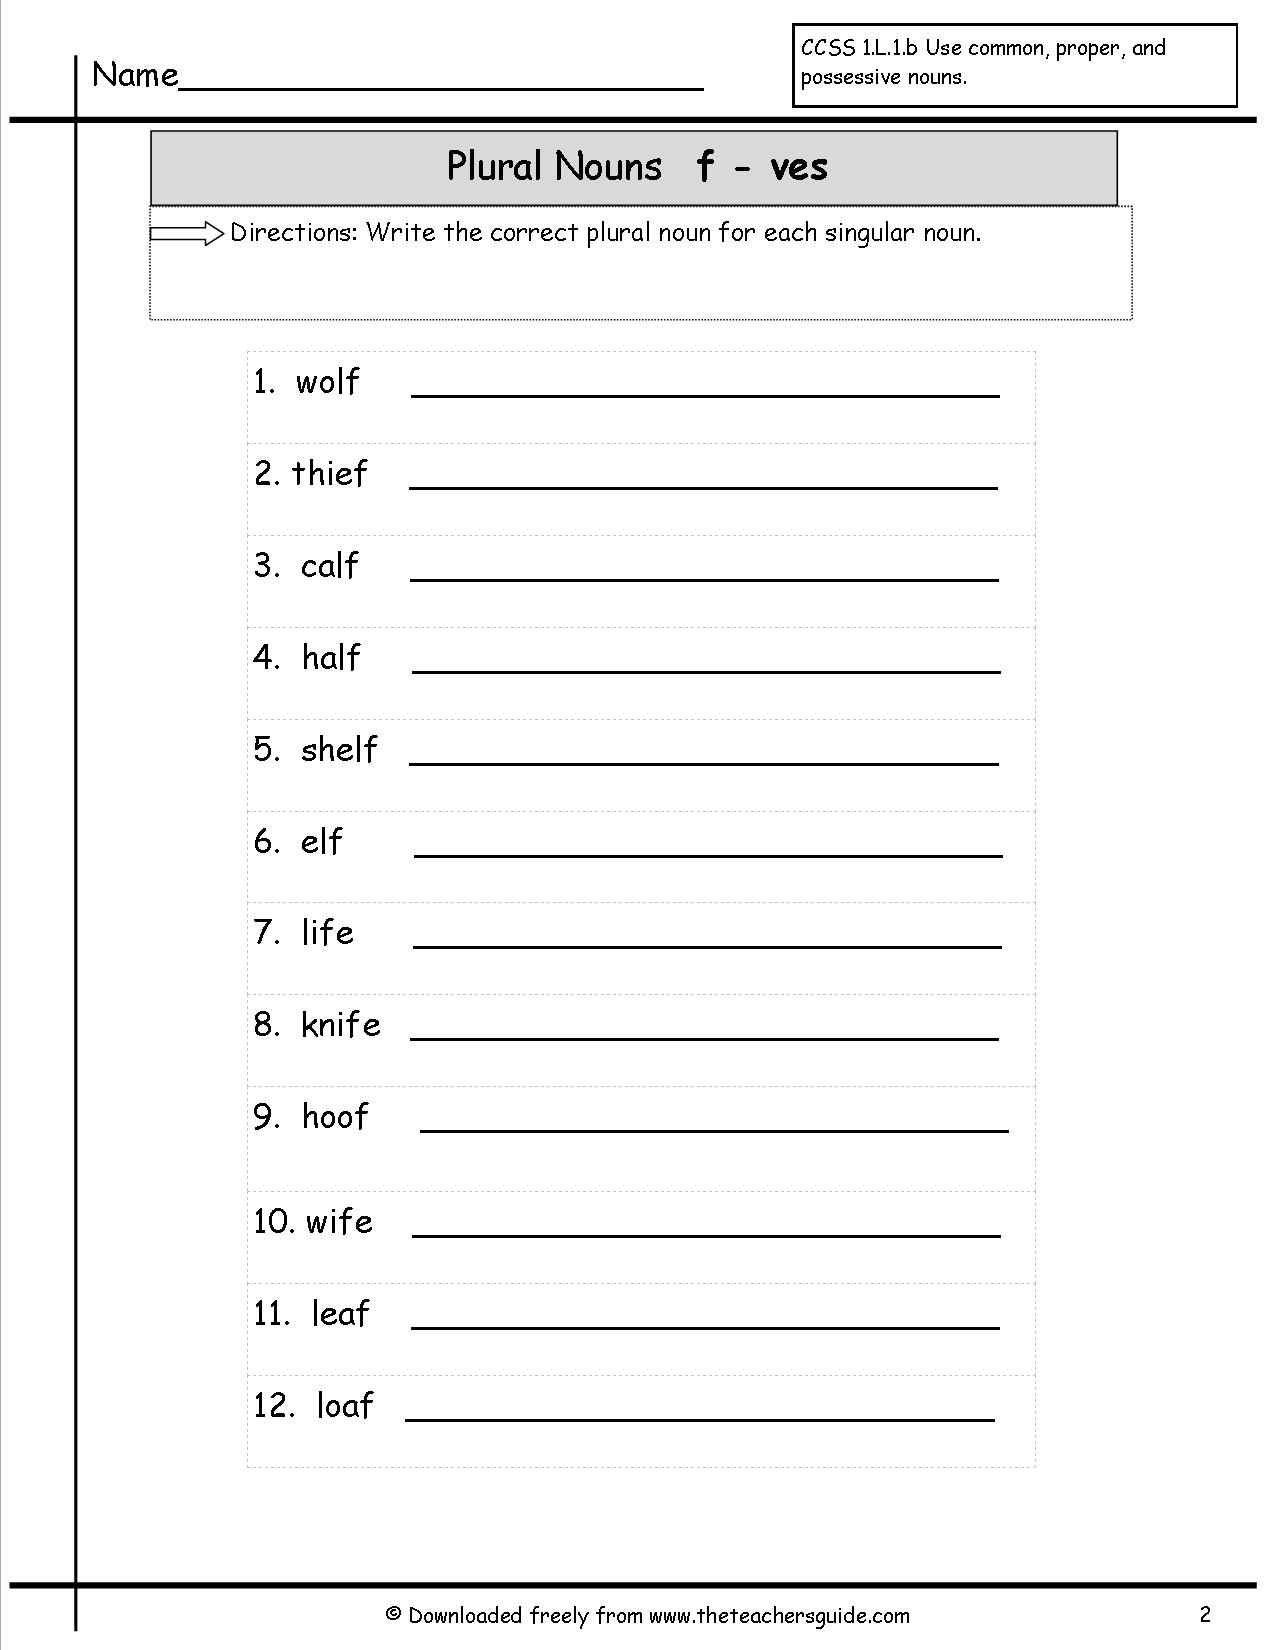 11-best-images-of-singular-and-plural-nouns-worksheets-singular-plural-nouns-worksheets